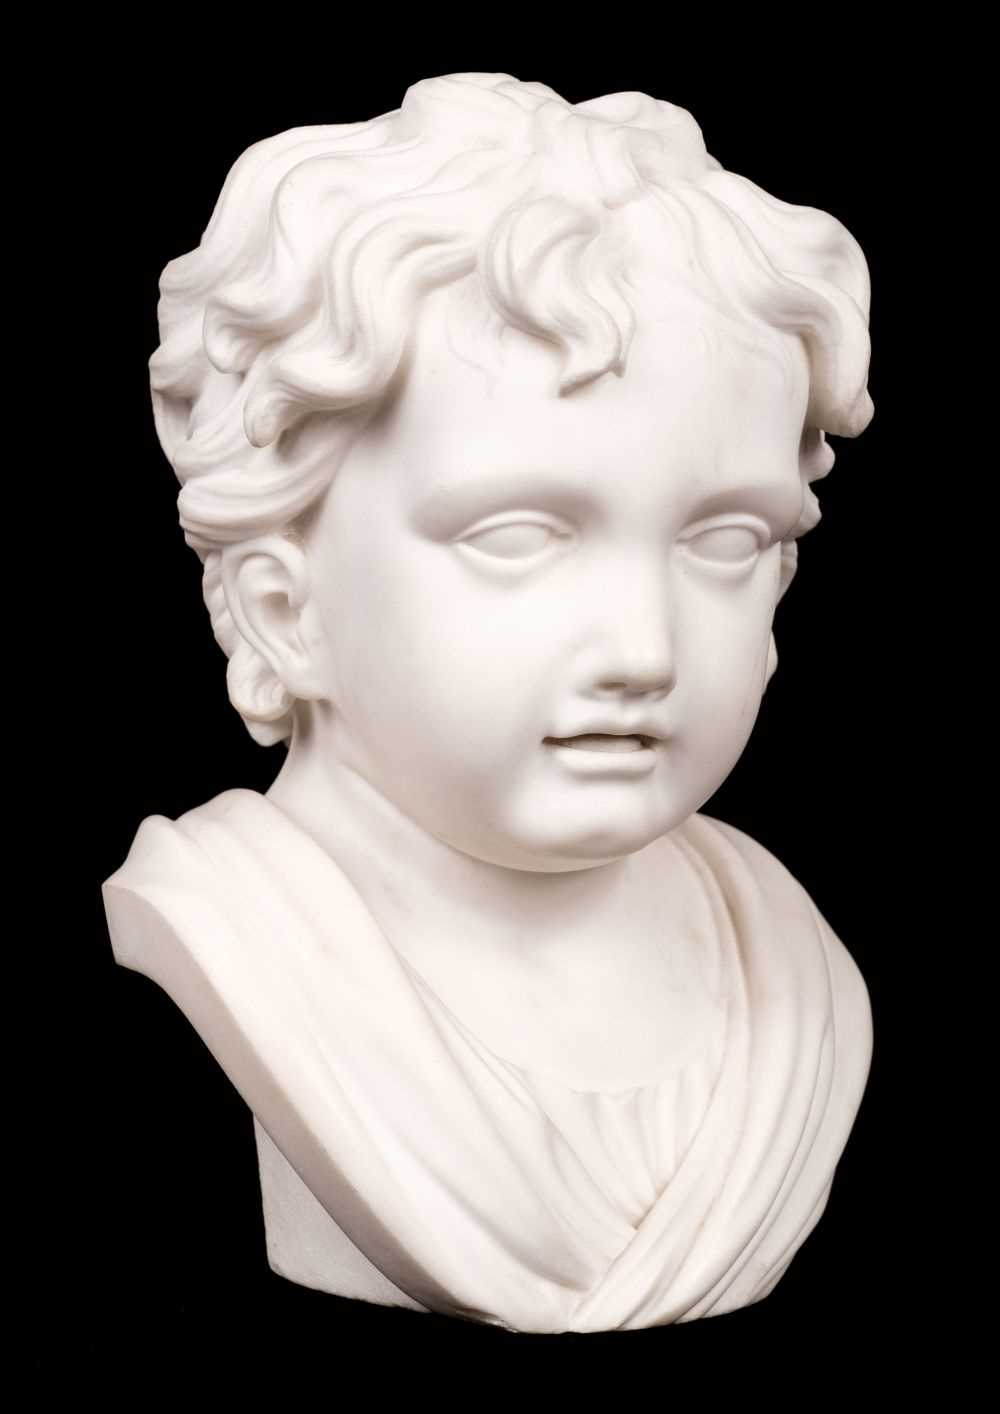 Lot 139 - Manner of François DuQuesnoy (1597-1643). Bust of a small boy, 18th century, white marble